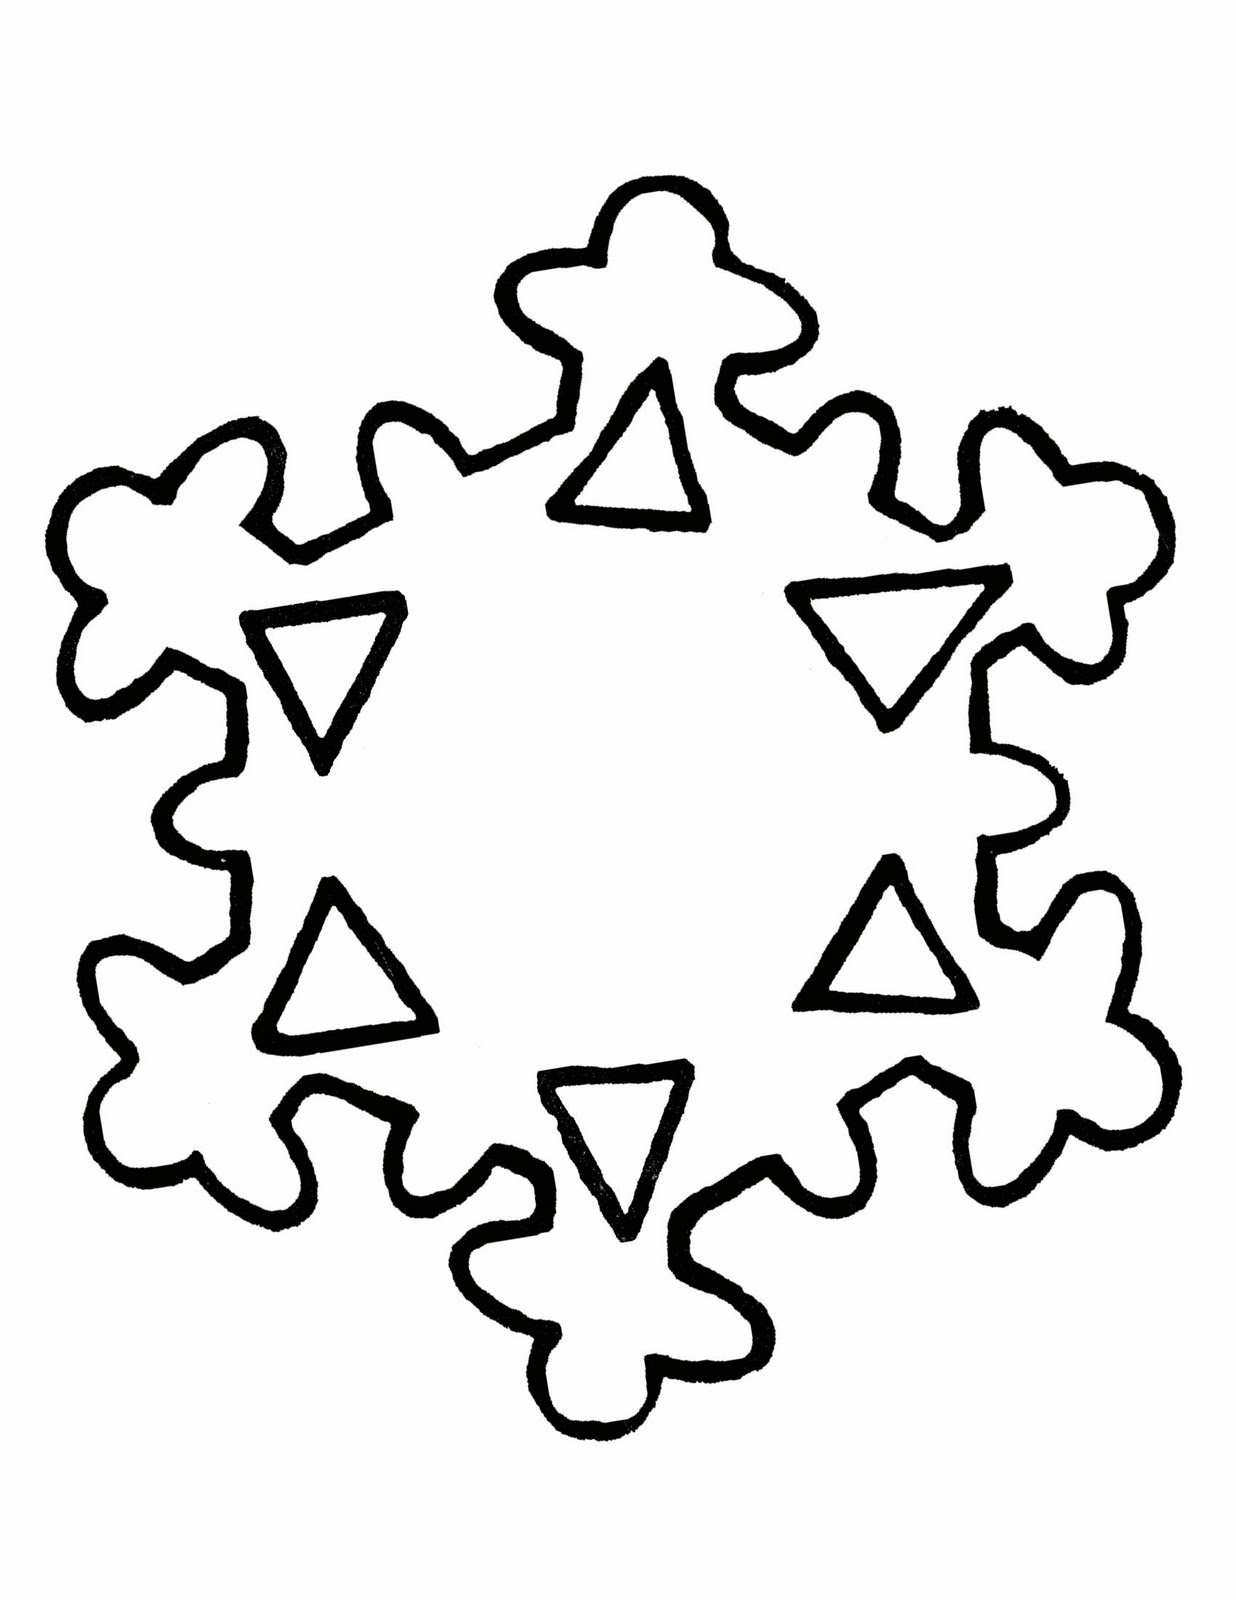 Free Cliparts Snowflake Patterns, Download Free Clip Art, Free Clip - Snowflake Template Free Printable